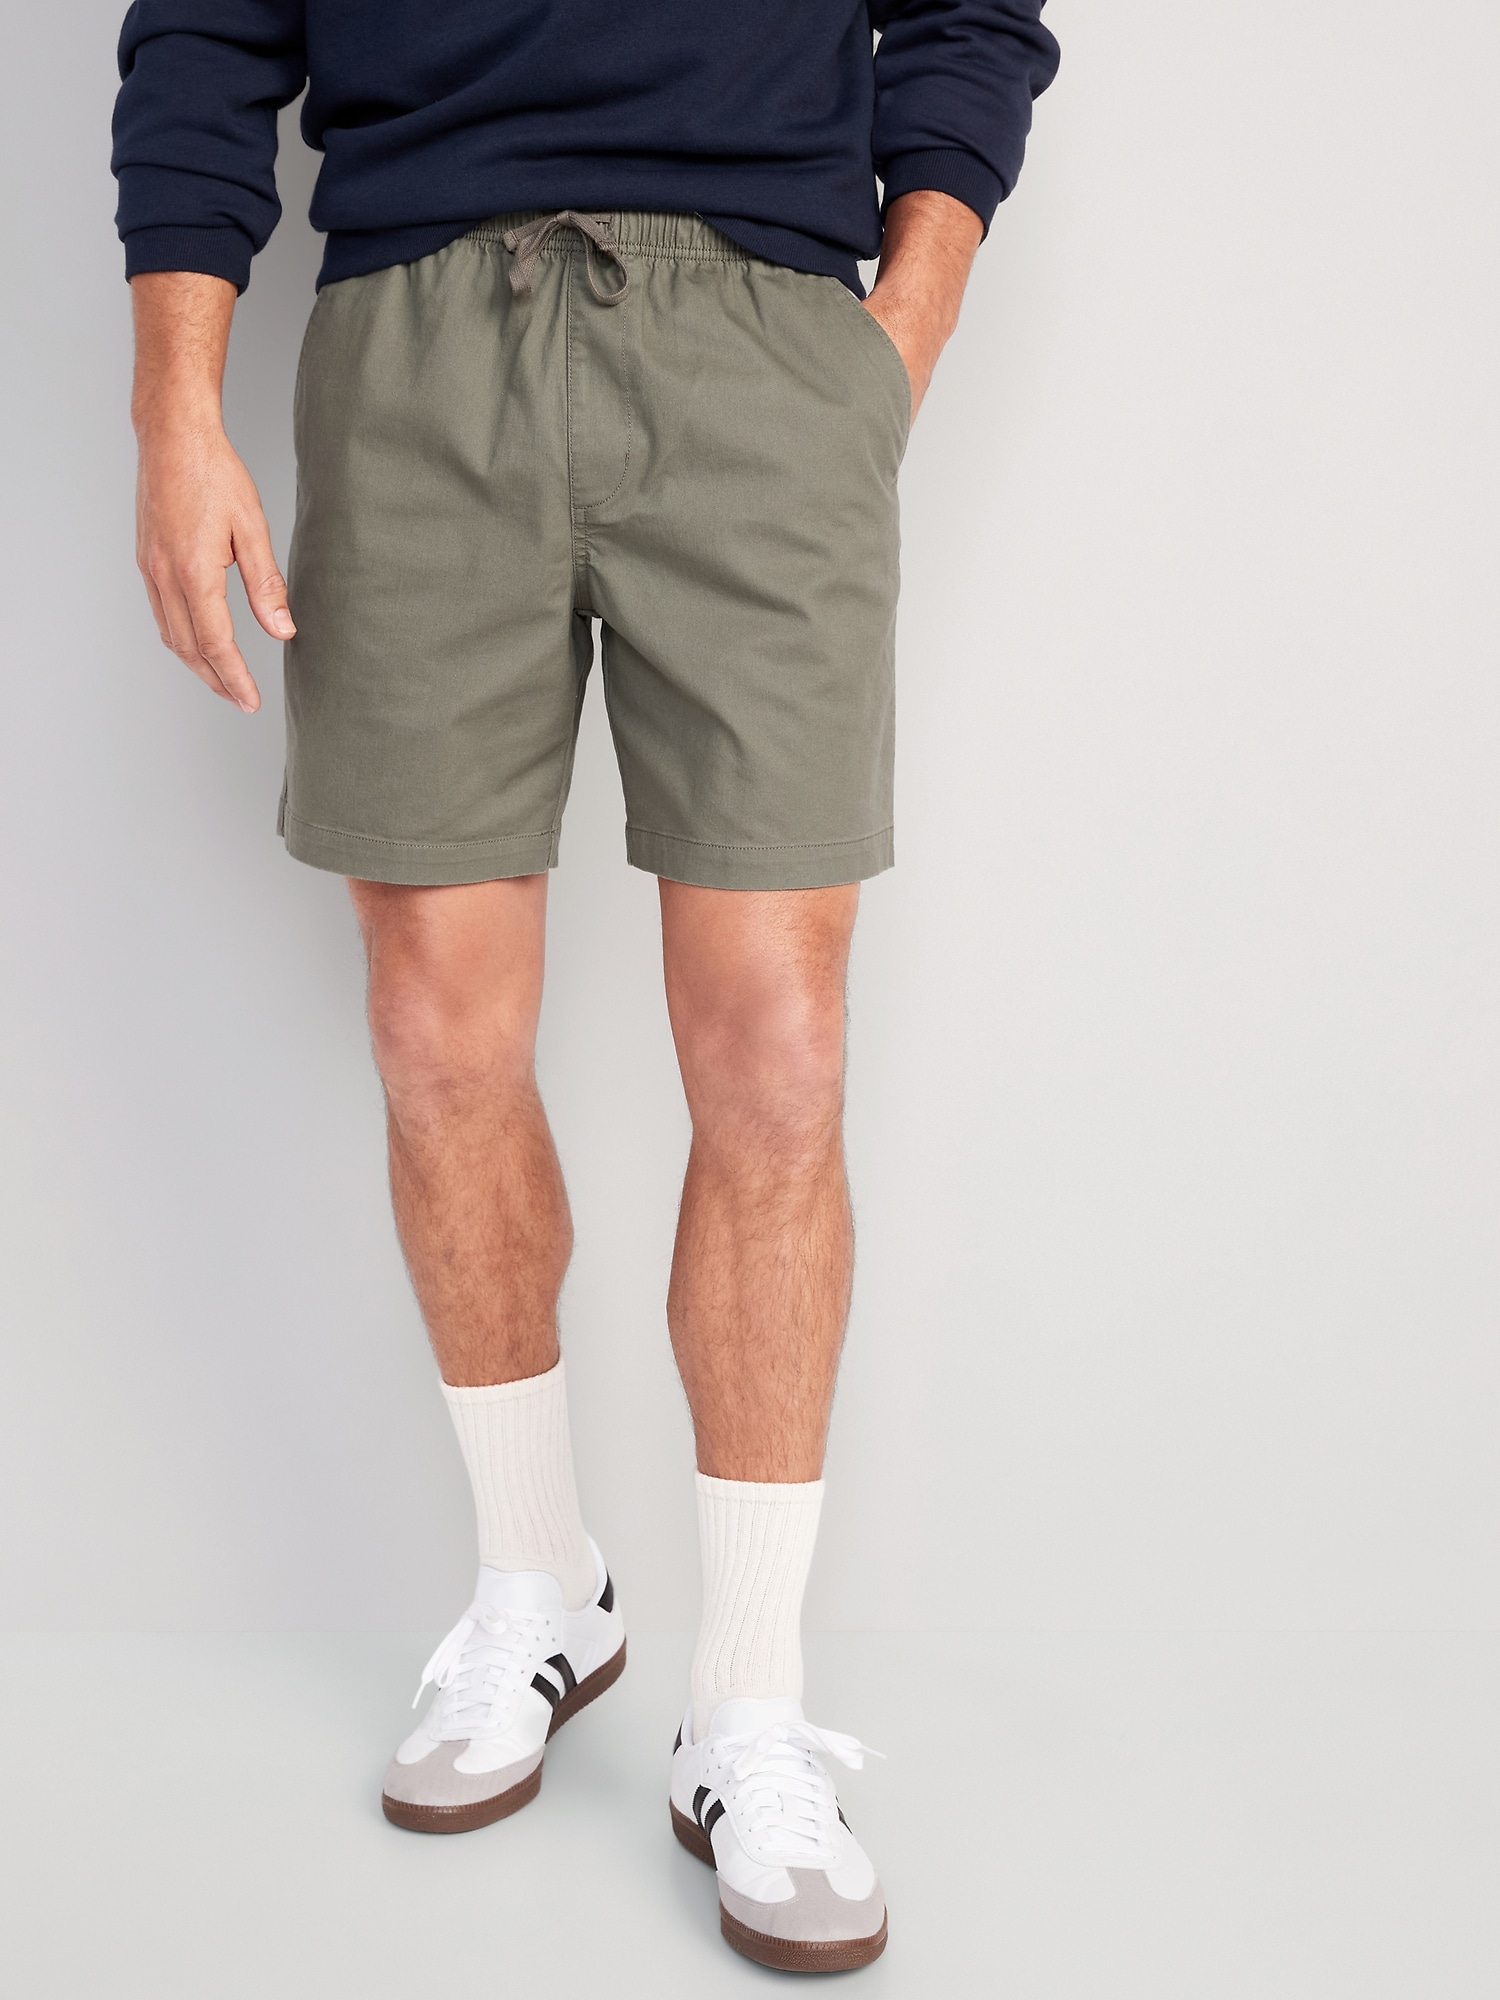 With pockets on either side, get Prisma's men #bermudas with a